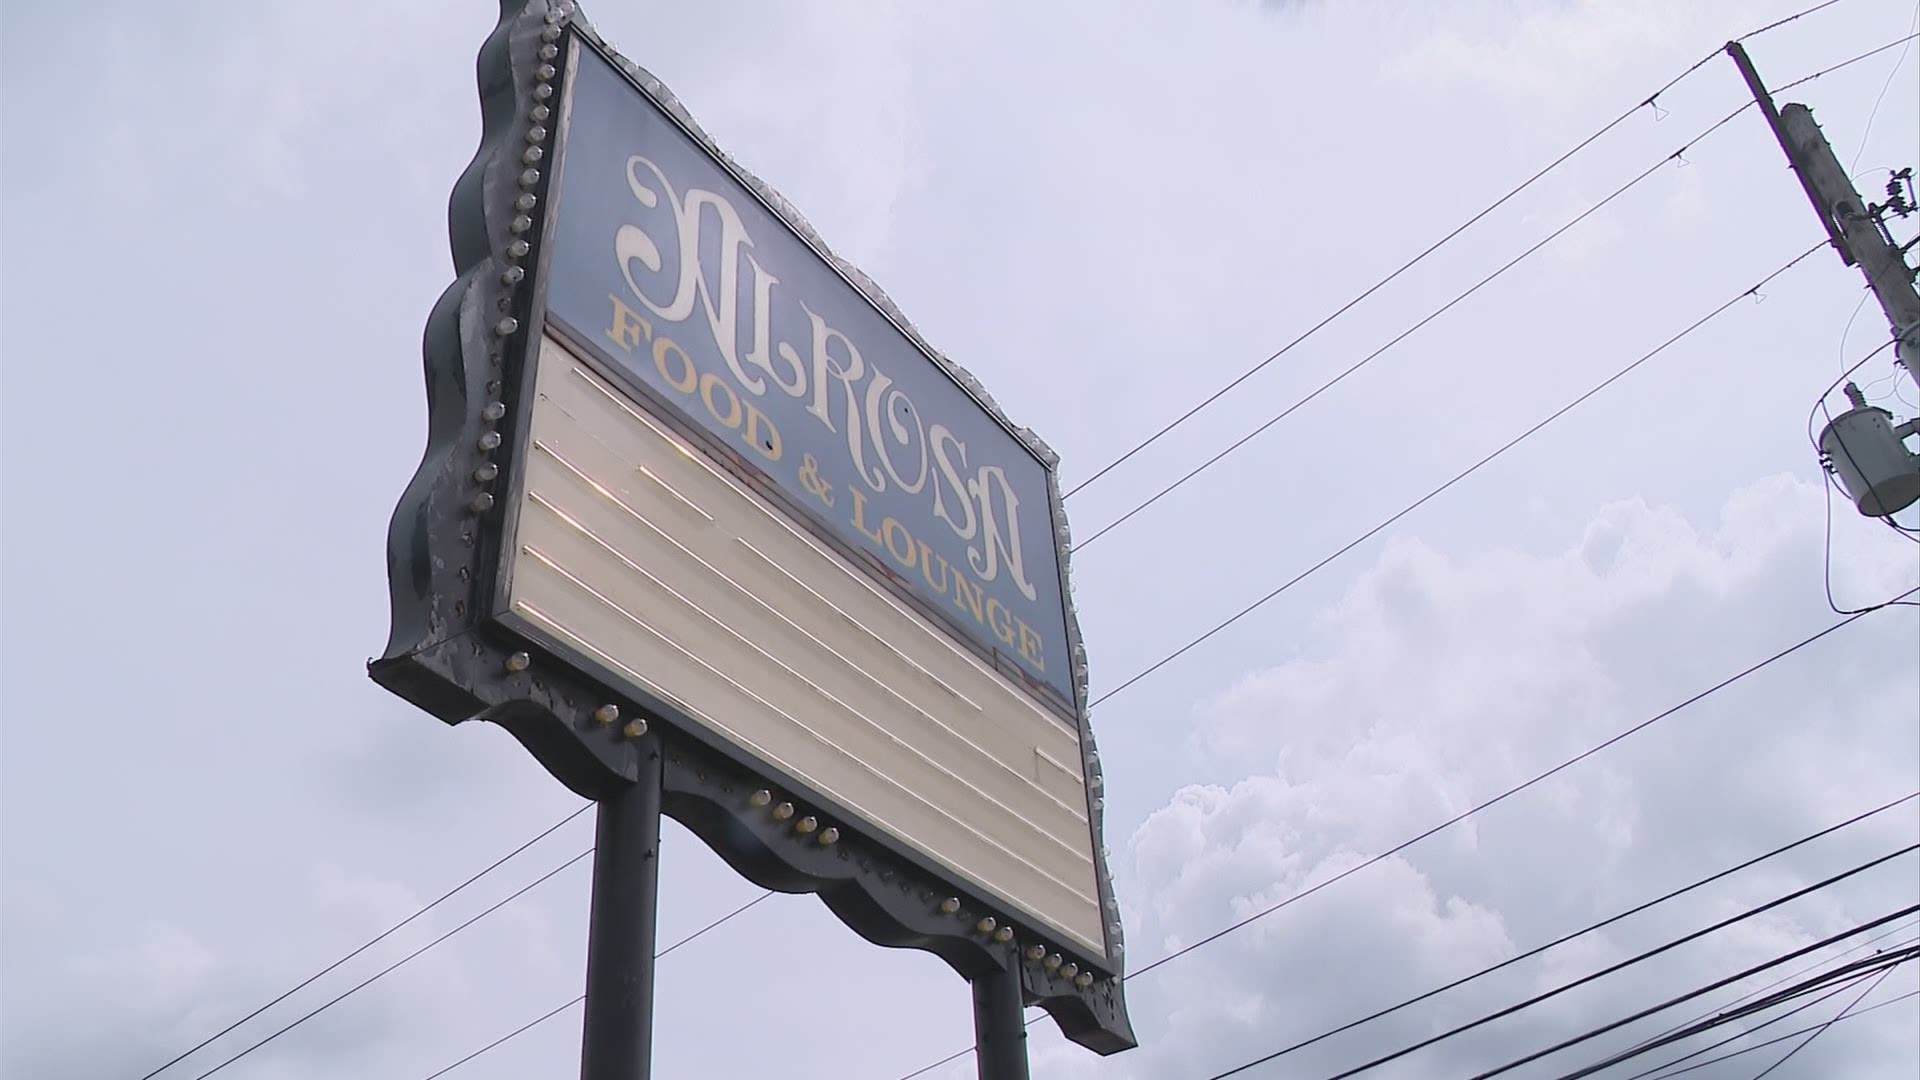 Alrosa Villa, a venue some people consider to be a historic staple in north Columbus, is about to be torn down for affordable housing.